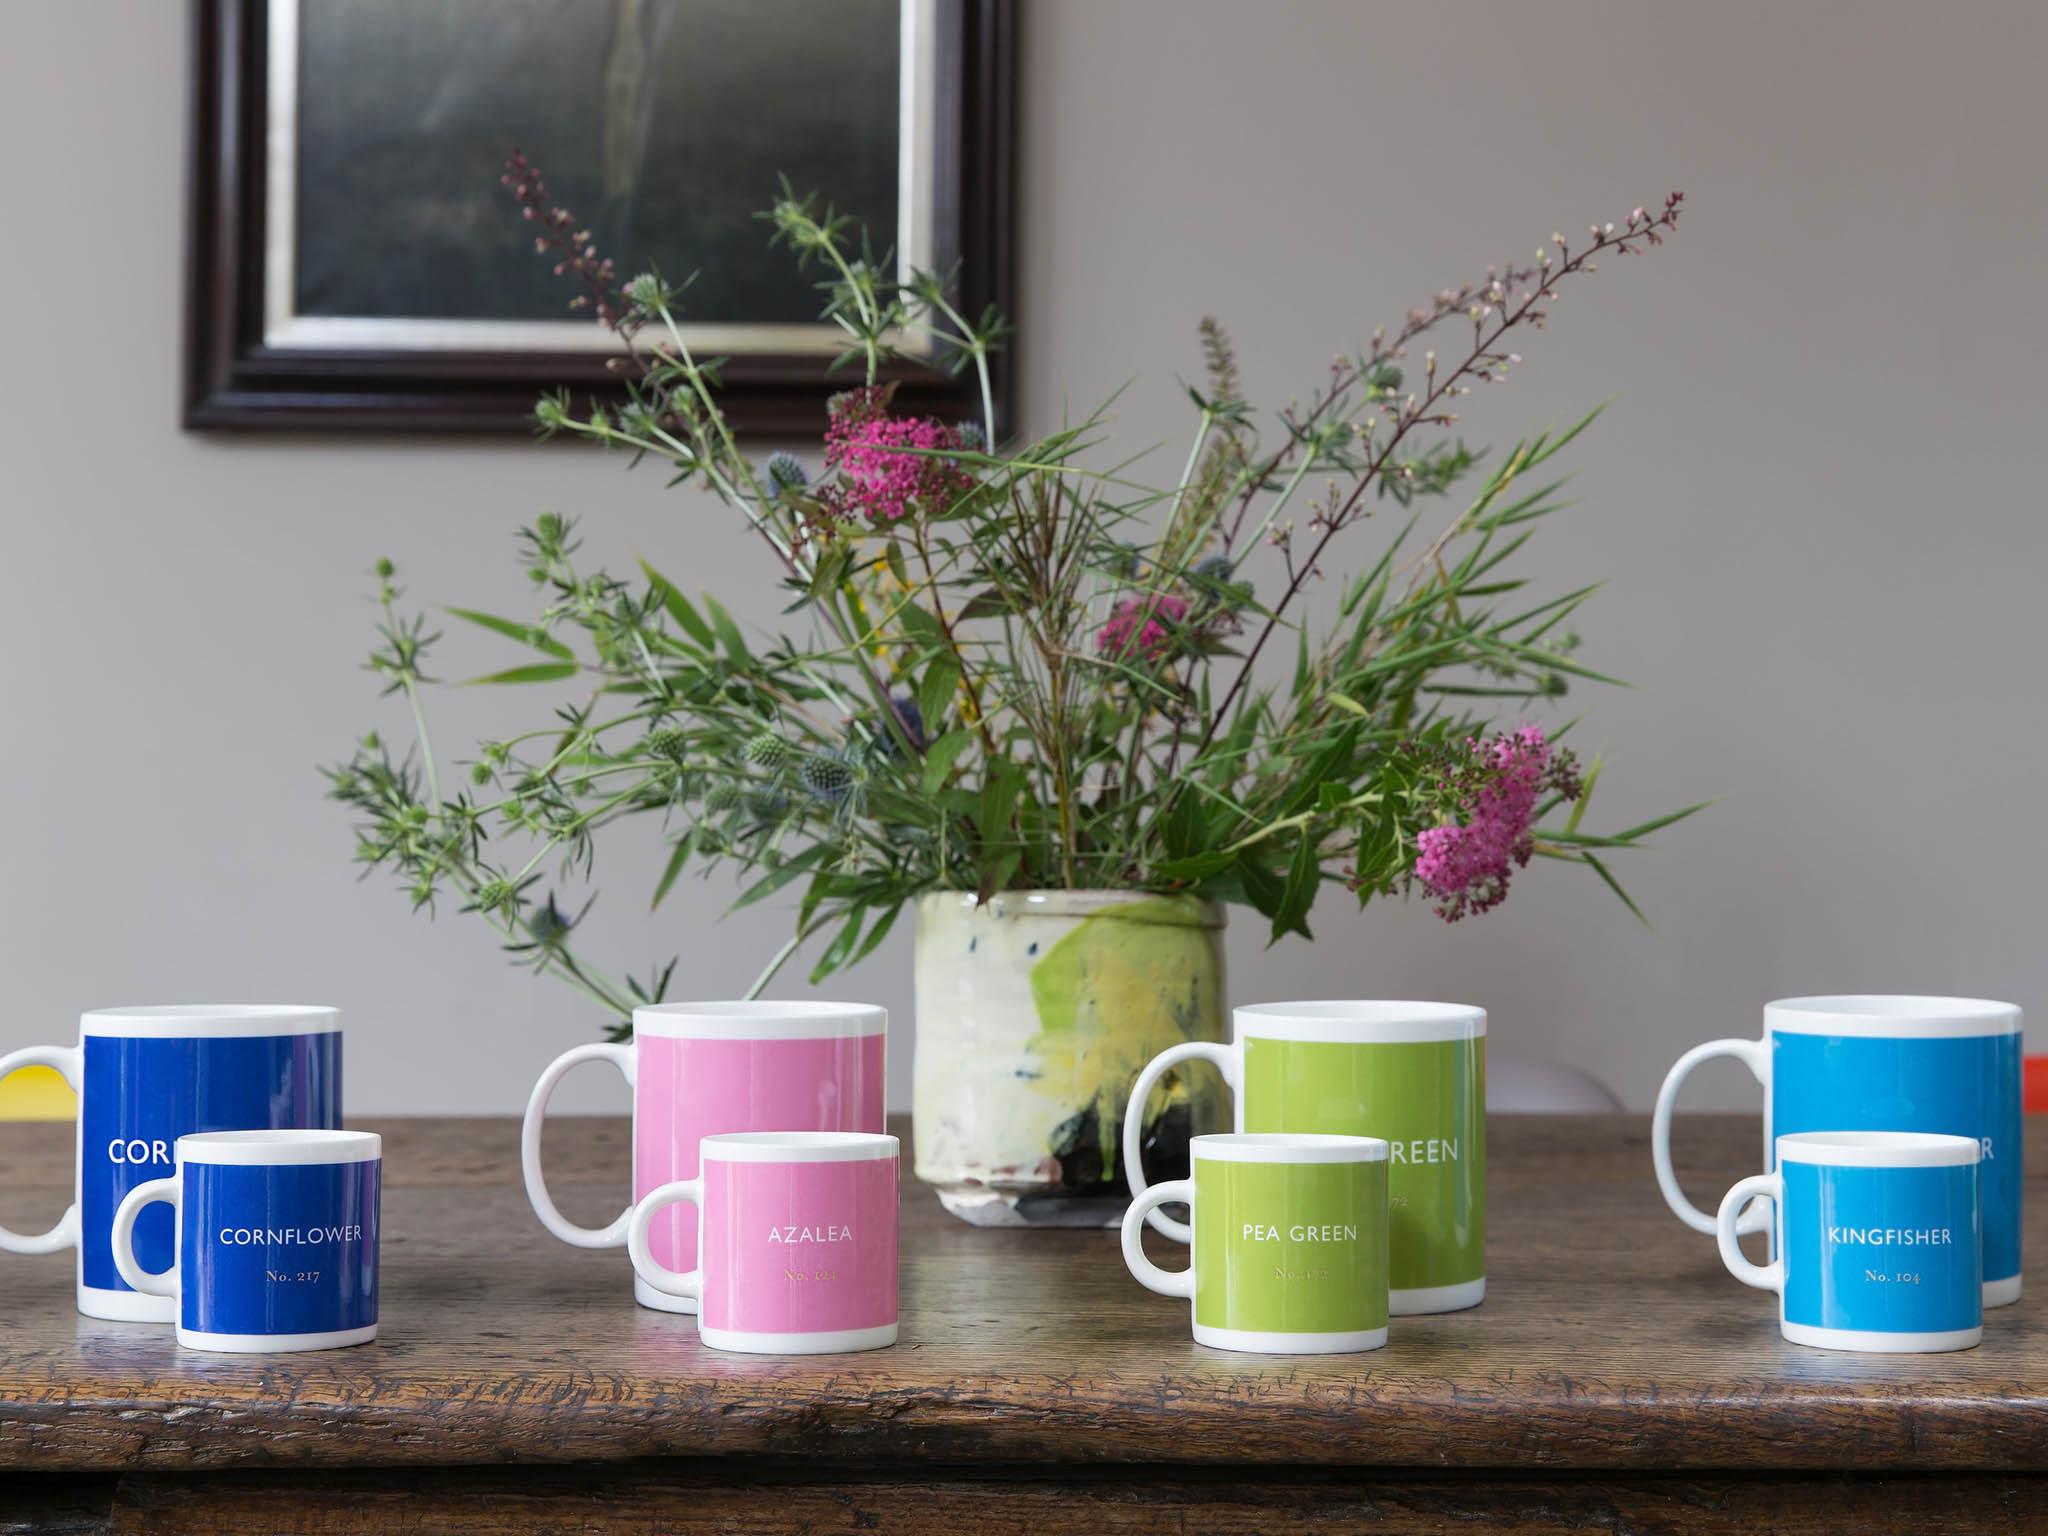 The mugs hark back to the colour standards once used in flags, stamps and rail liveries